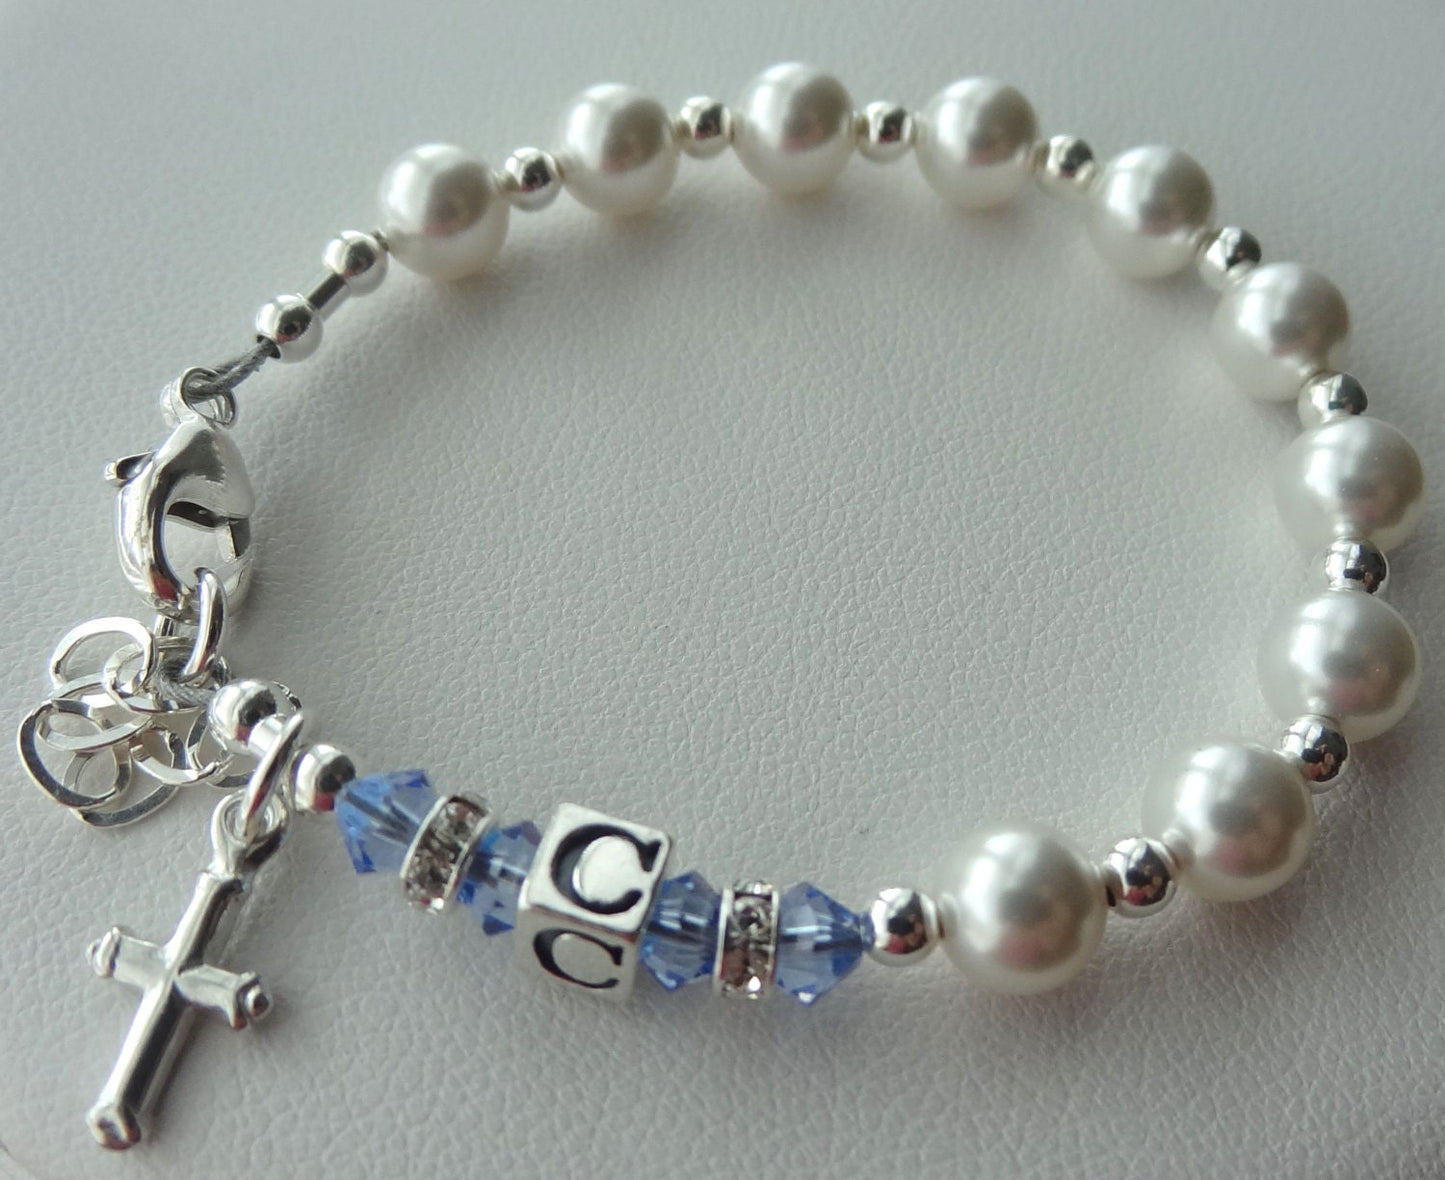 Silver Baby Baptism Personalized Initial Rosary Bracelet, Initial Birthstone Rosary Bracelet